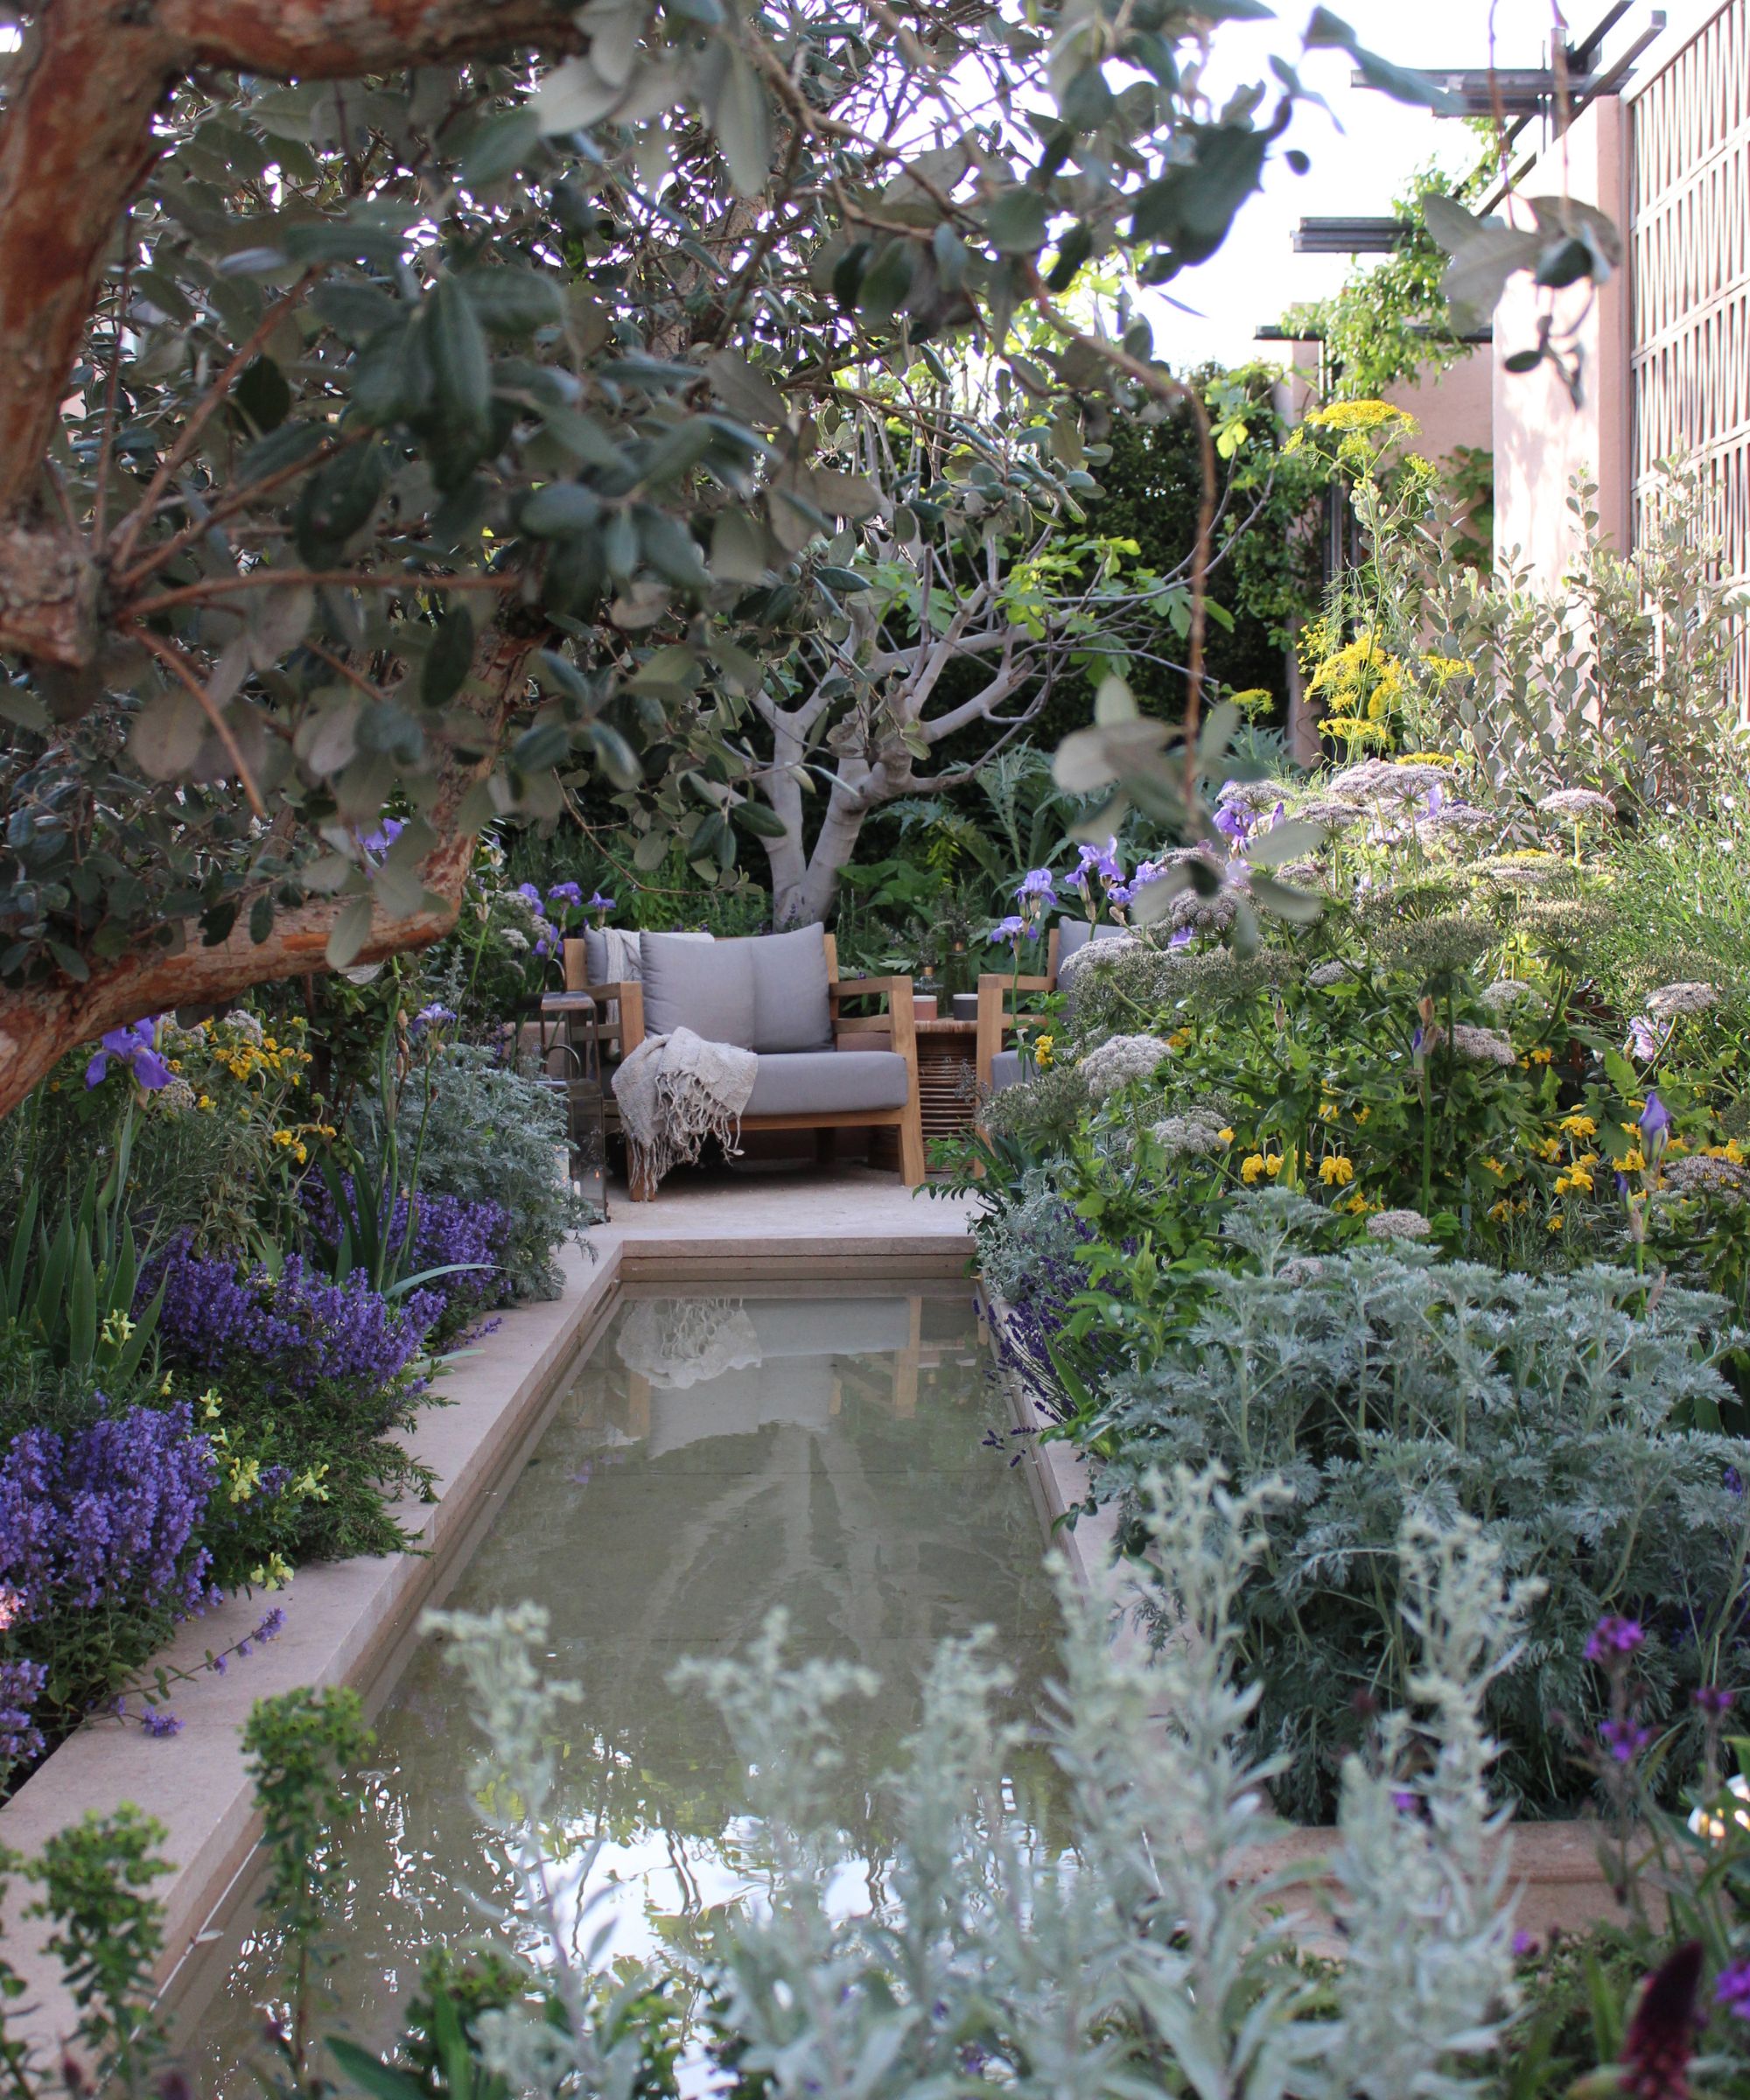 A reflective pond at RHS Chelsea Flower Show